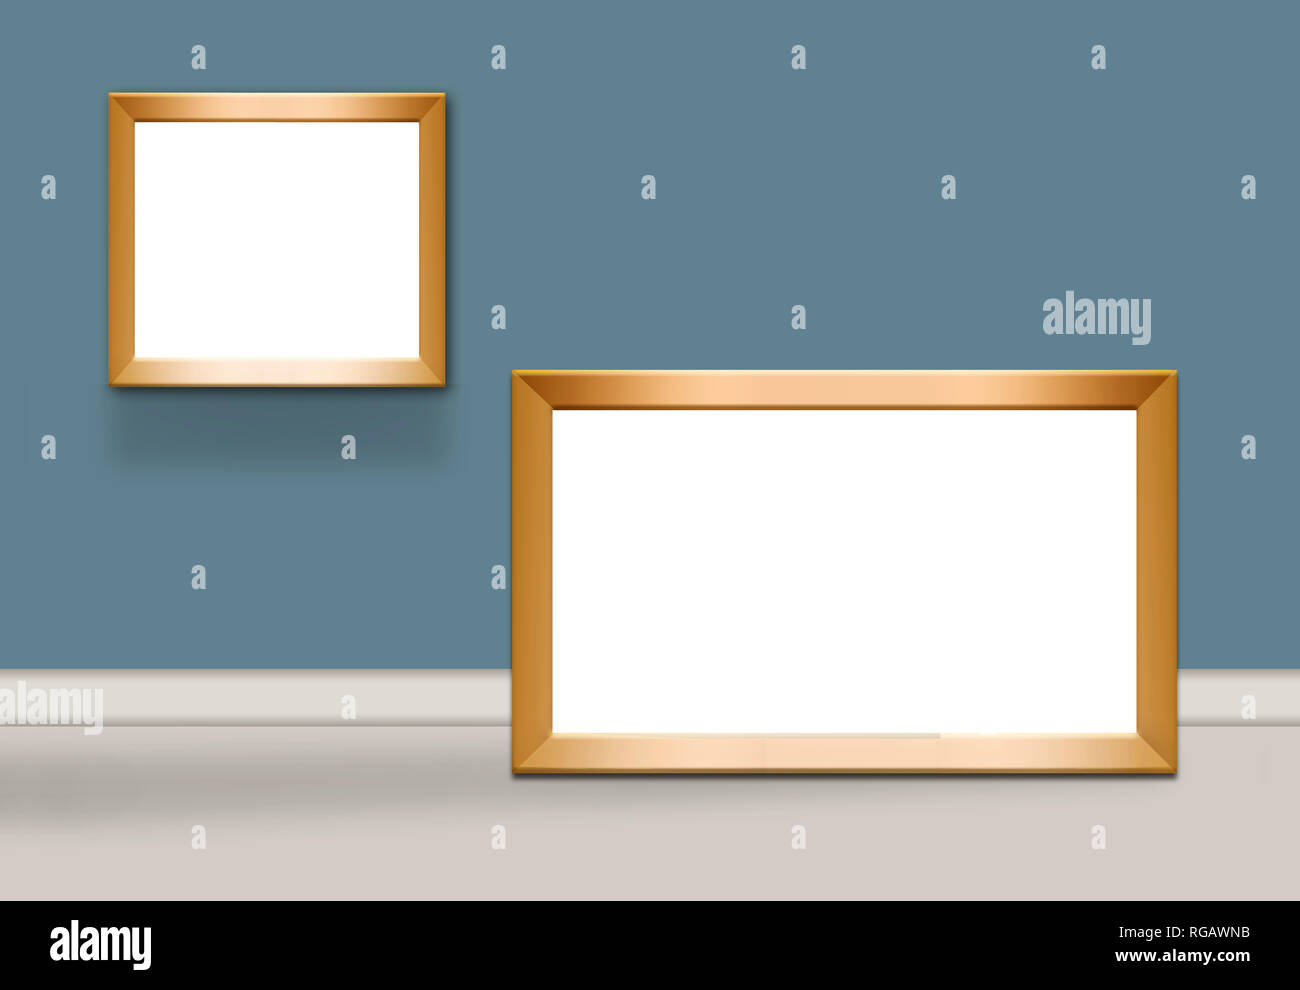 Here is a blank framed area that can be used to add text or art in a layout. This is an illustration. Stock Photo